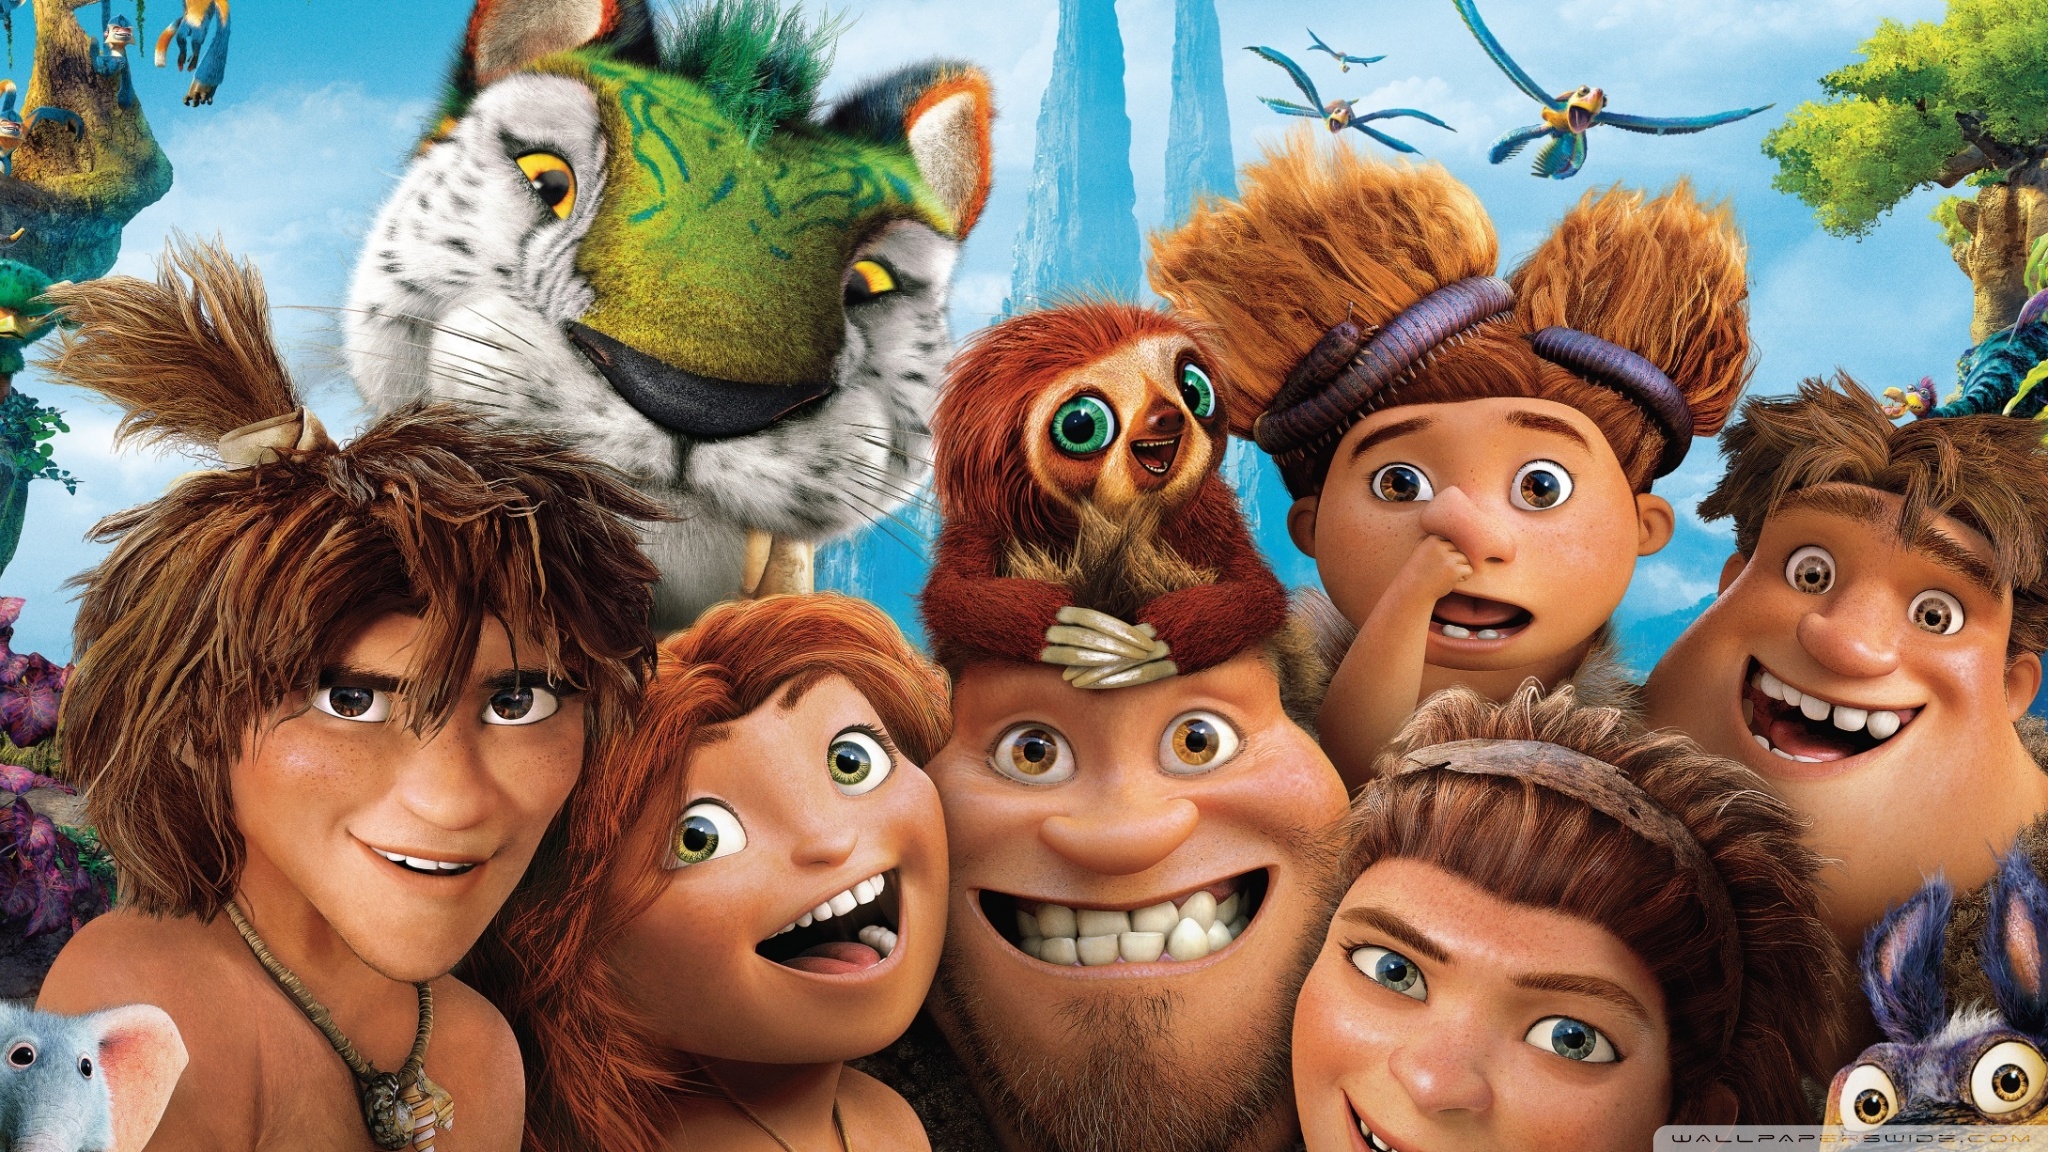 The Croods #2